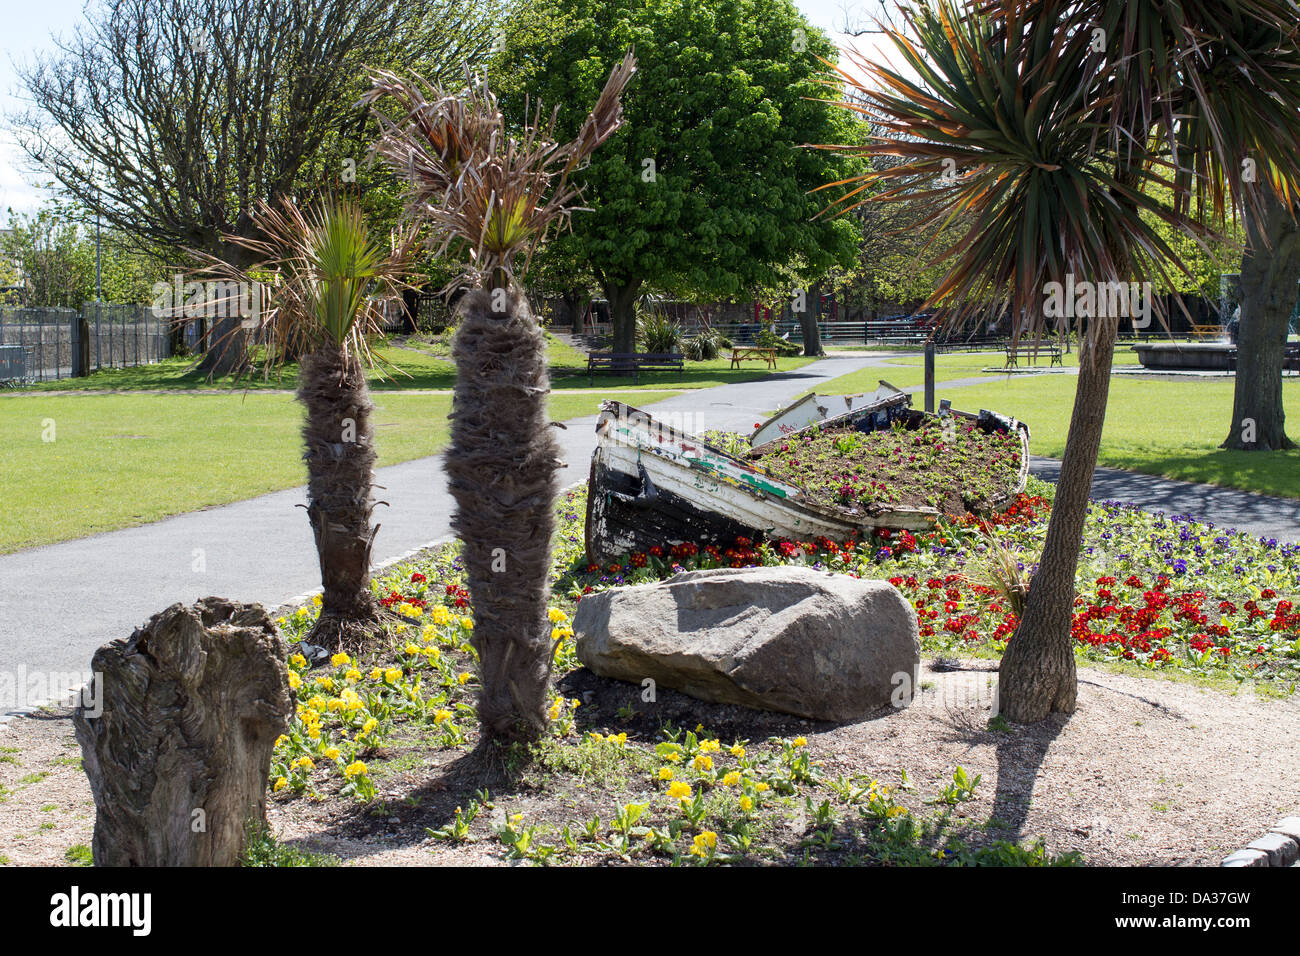 Exotic trees and a used boat transformed into a flower bed, People's Park, Dún Laoghaire. Stock Photo